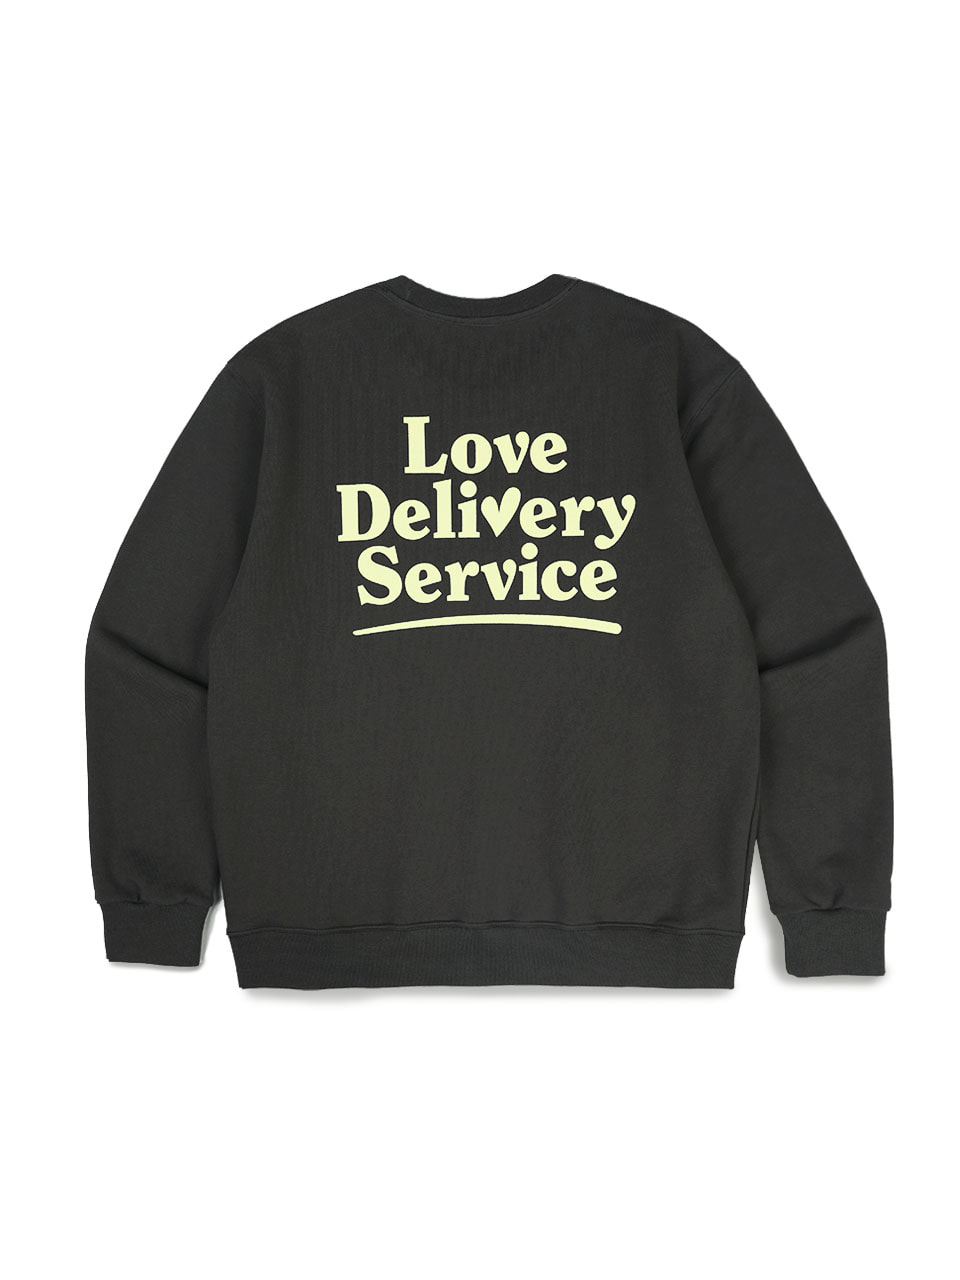 Love delivery service Sweatshirt chacoal